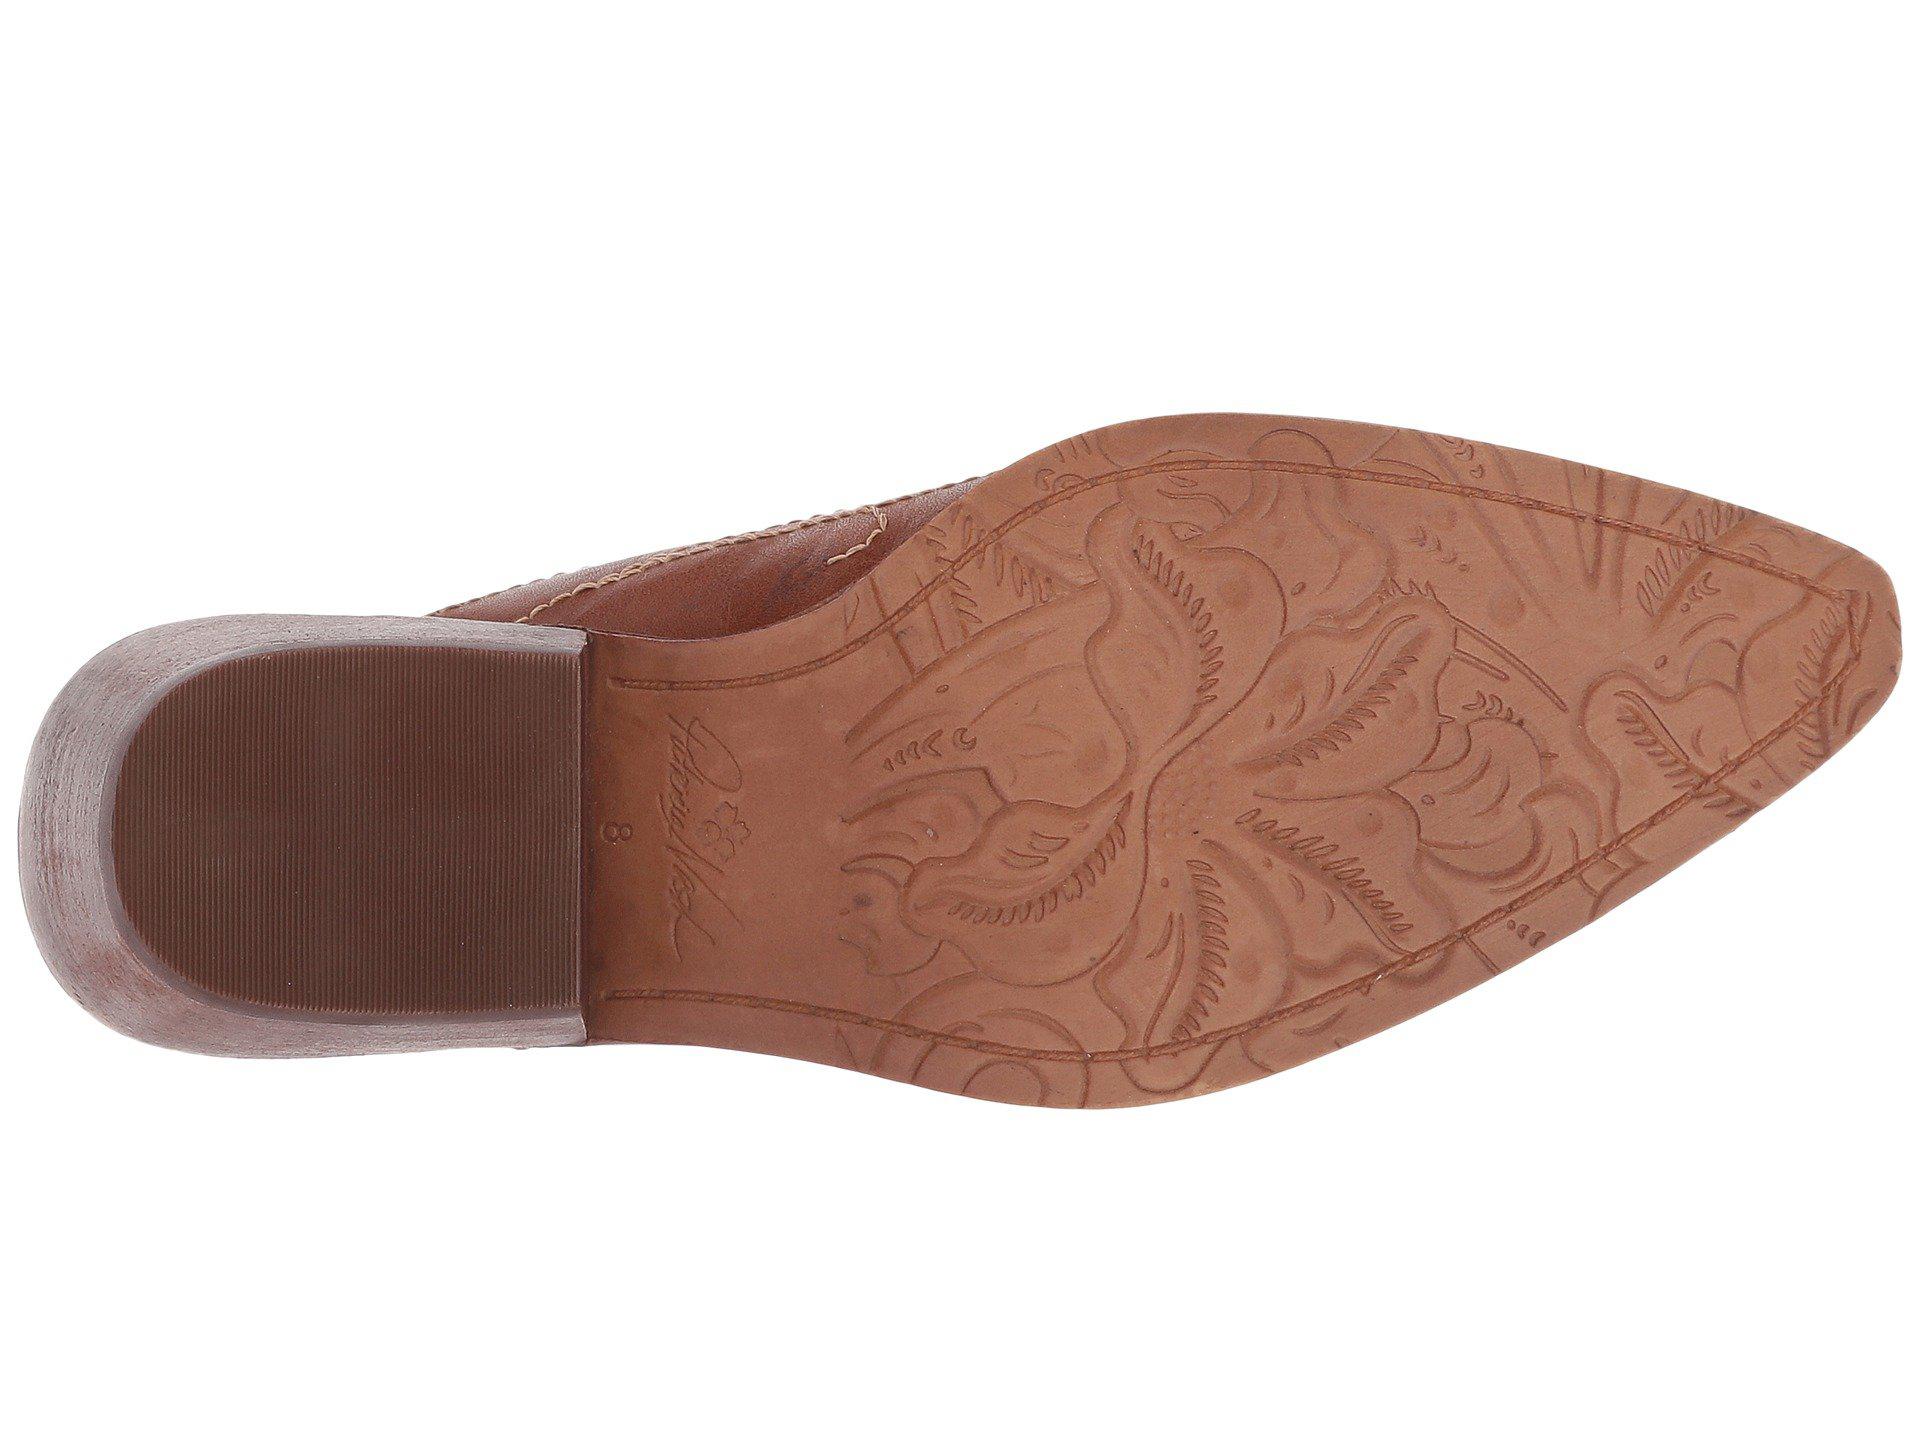 Patricia Nash Benedetta (tan Leather) Women's Clog Shoes